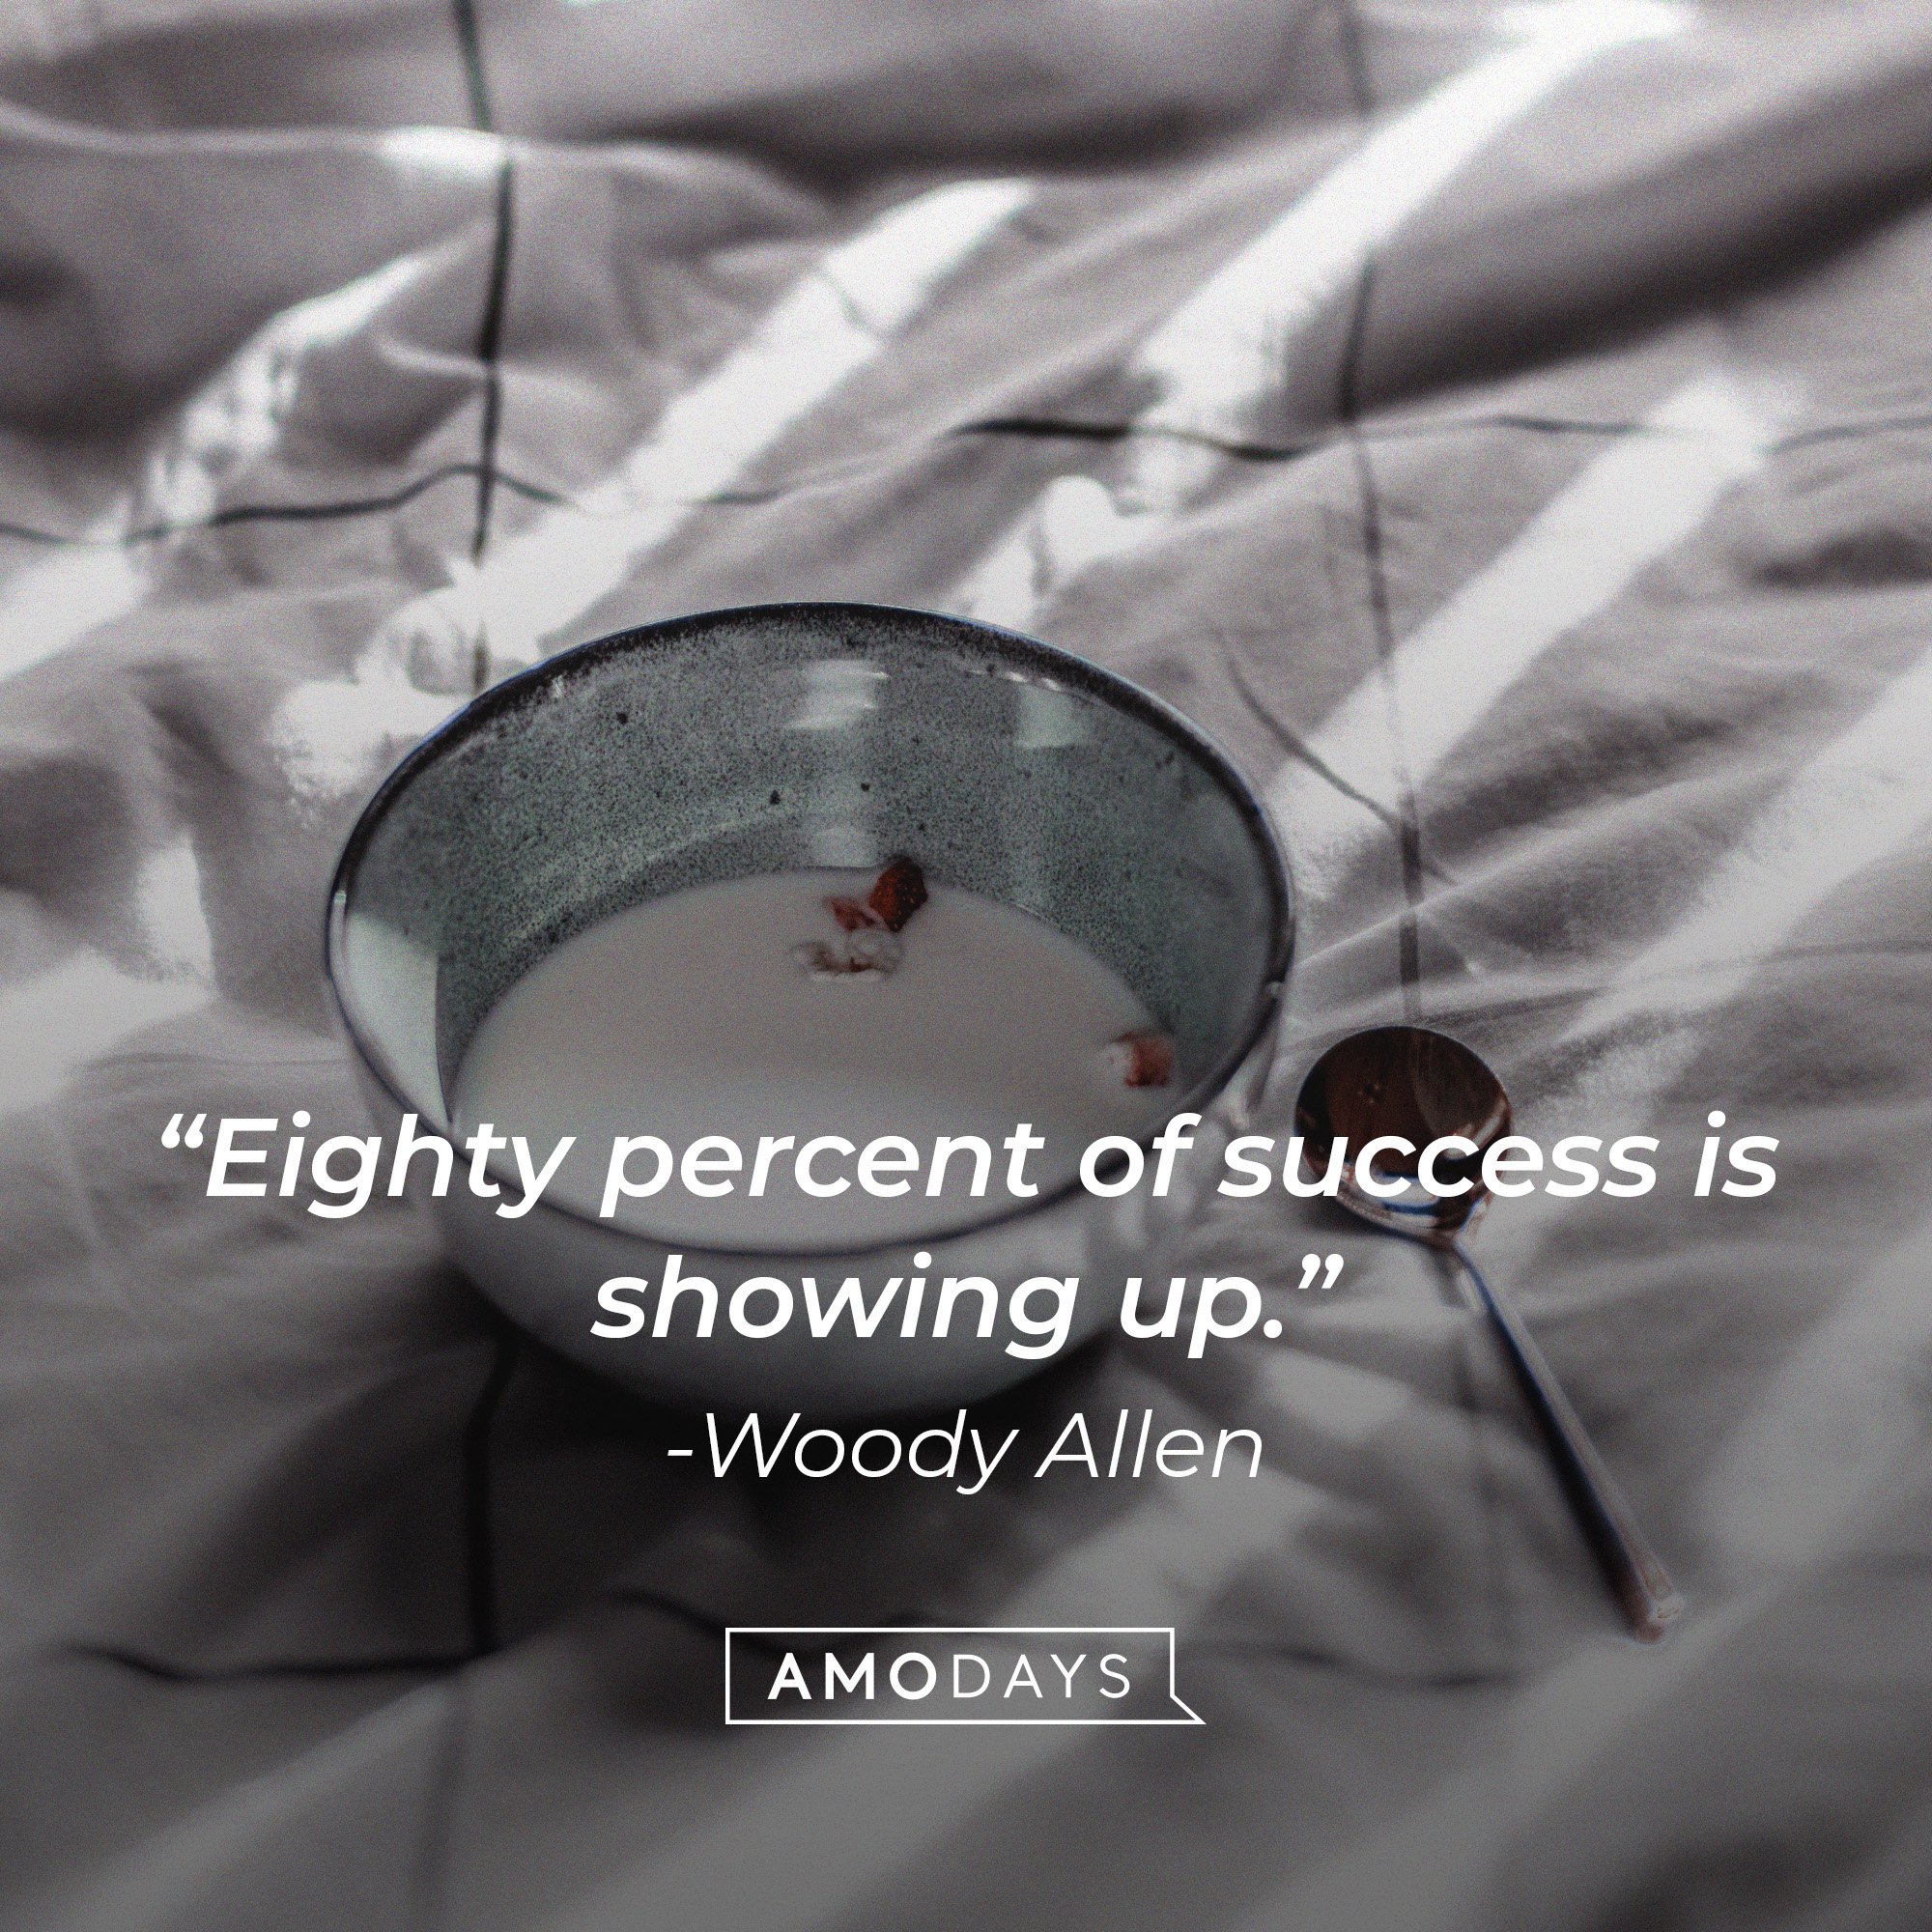 Woody Allen's quote: “Eighty percent of success is showing up.” | Image: AmoDays 